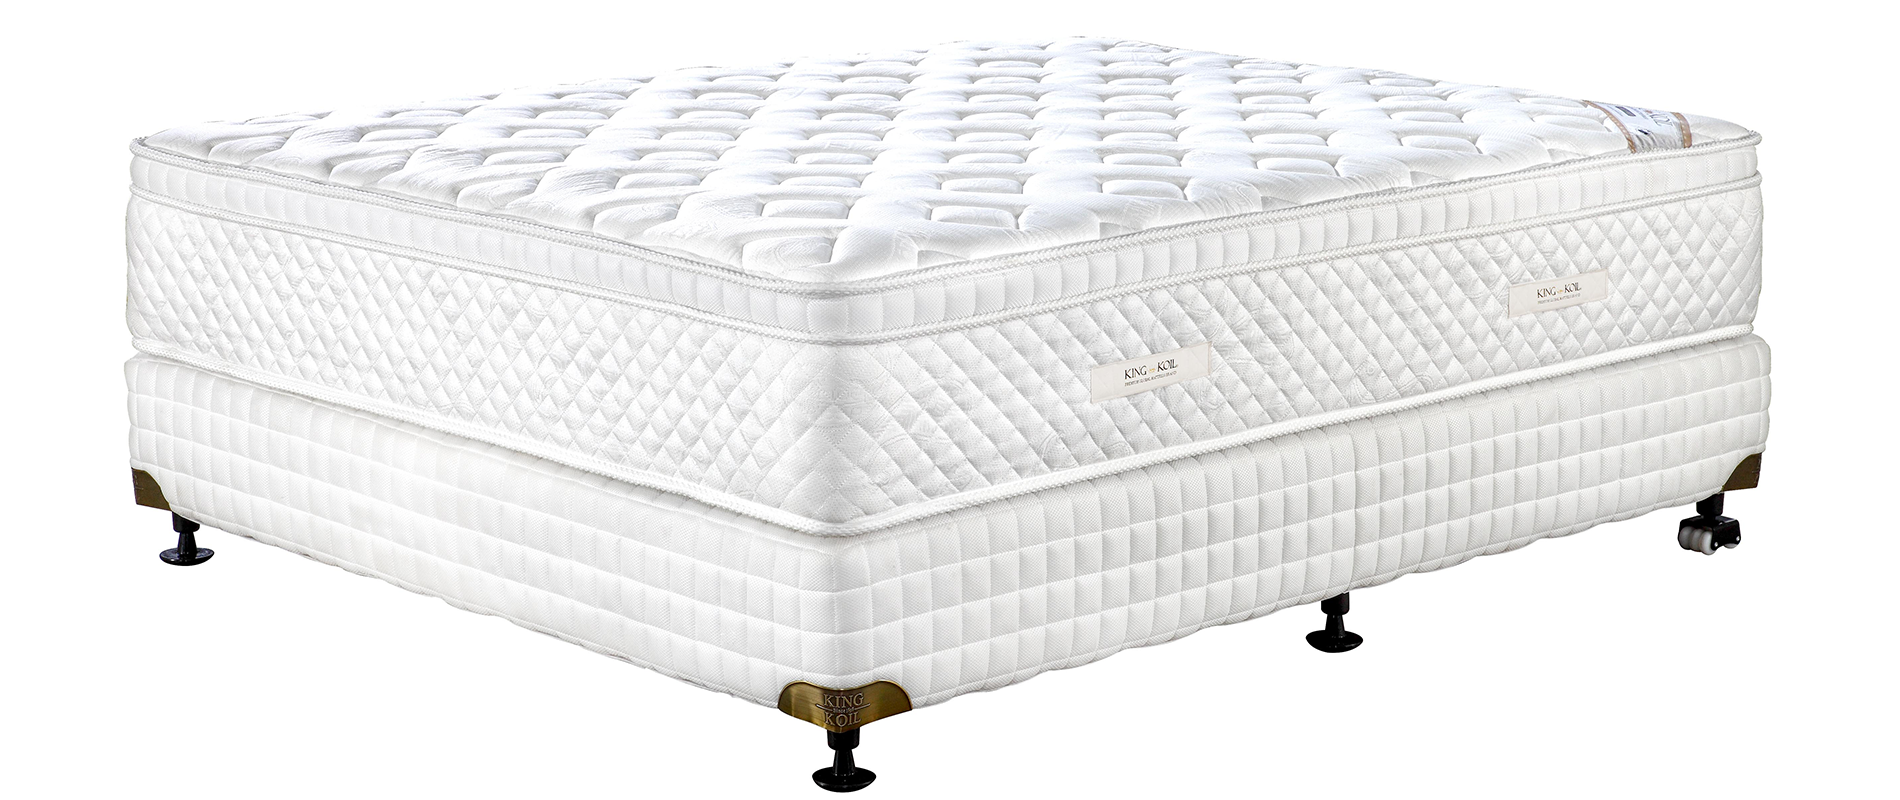 simply the best mattress price